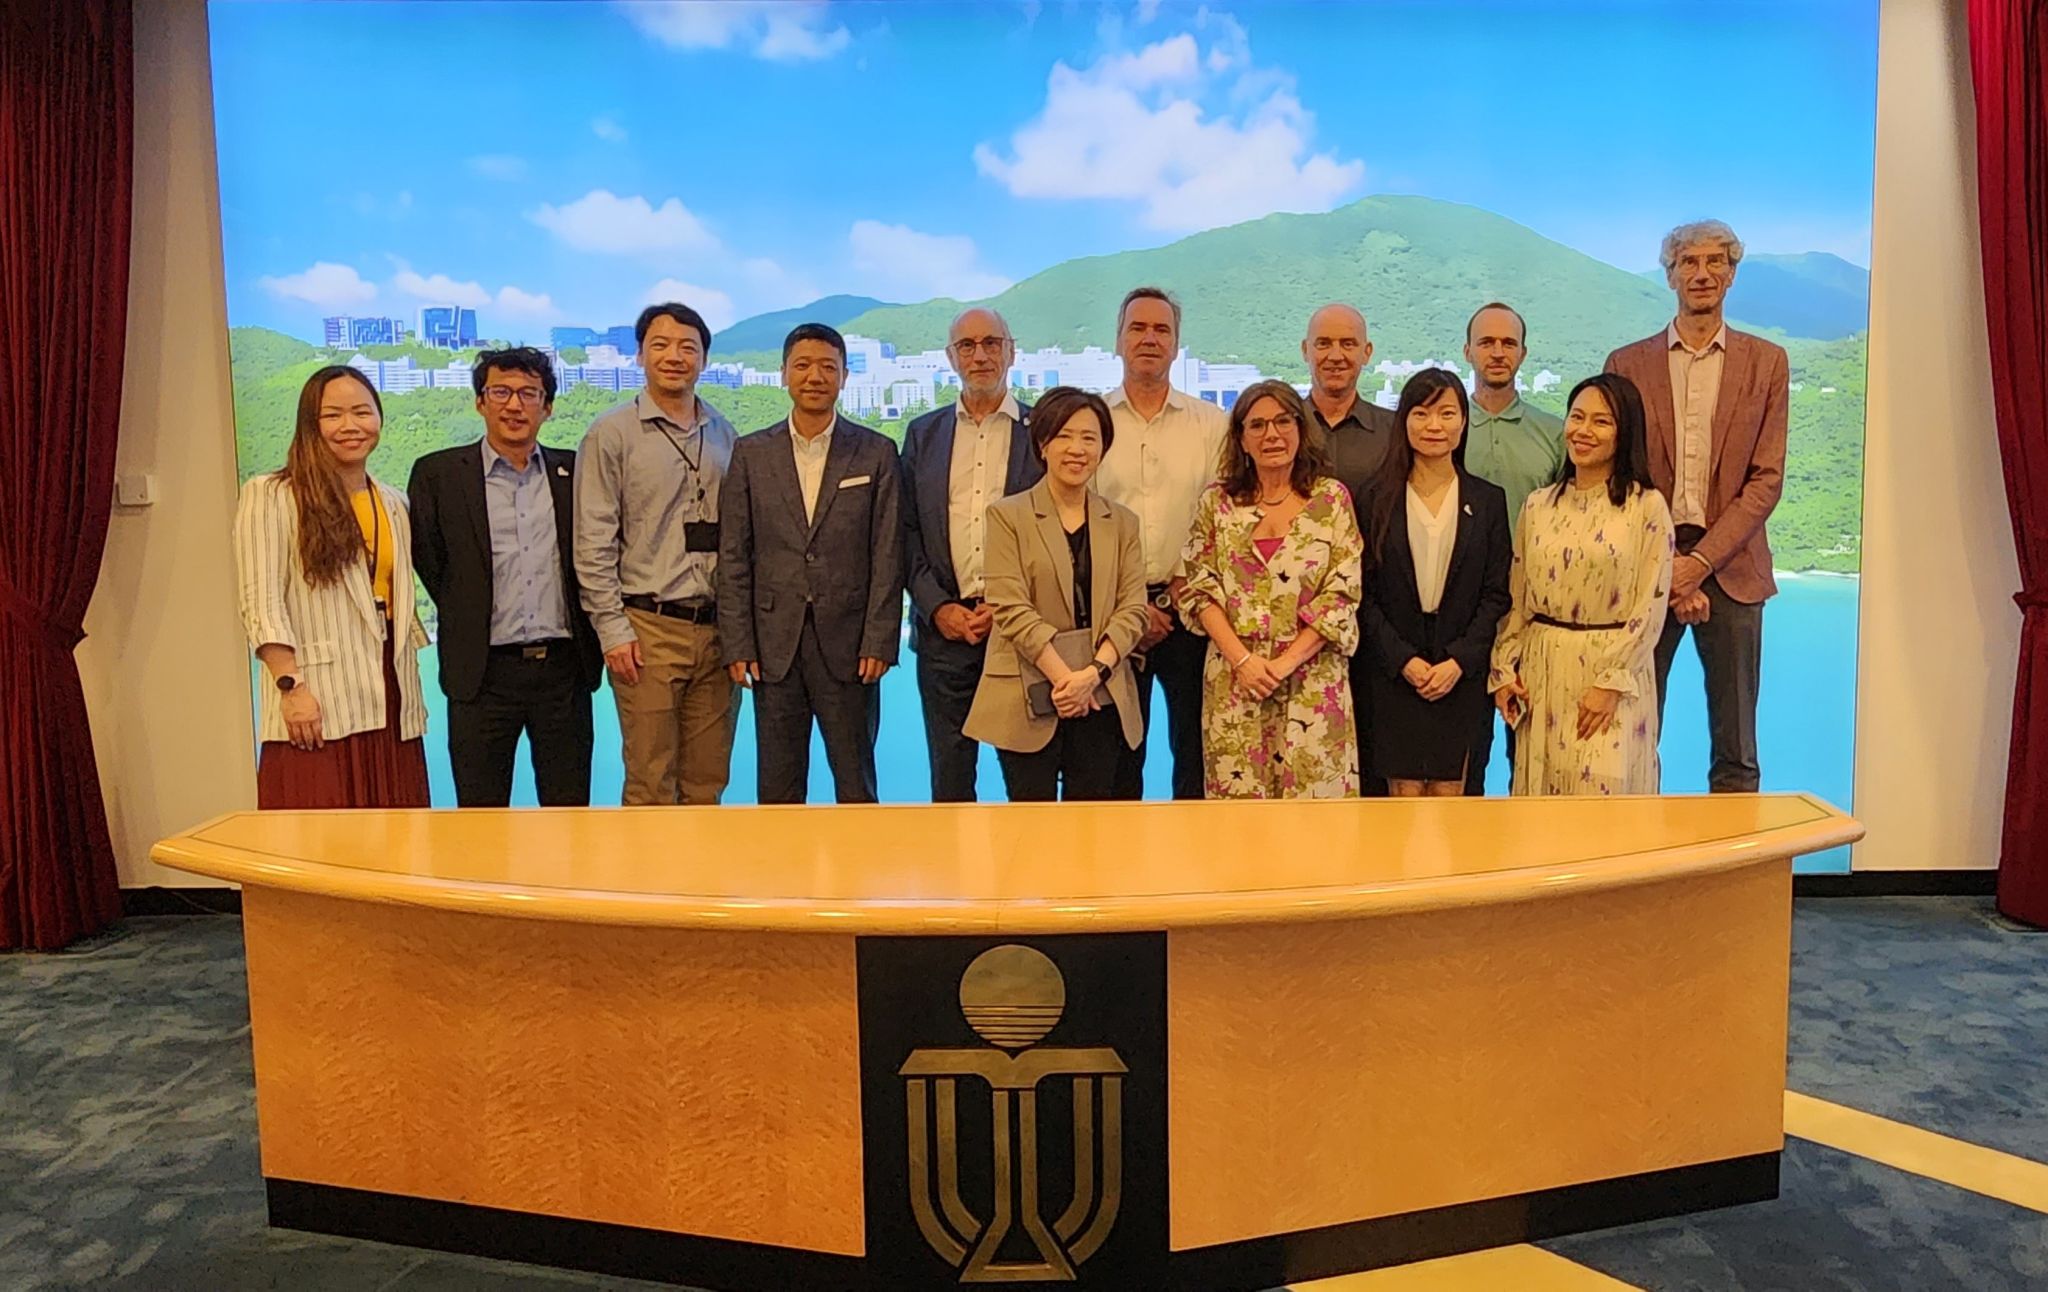 HKUST receives a delegation from Ghent University, Belgium to the campus on June 7.